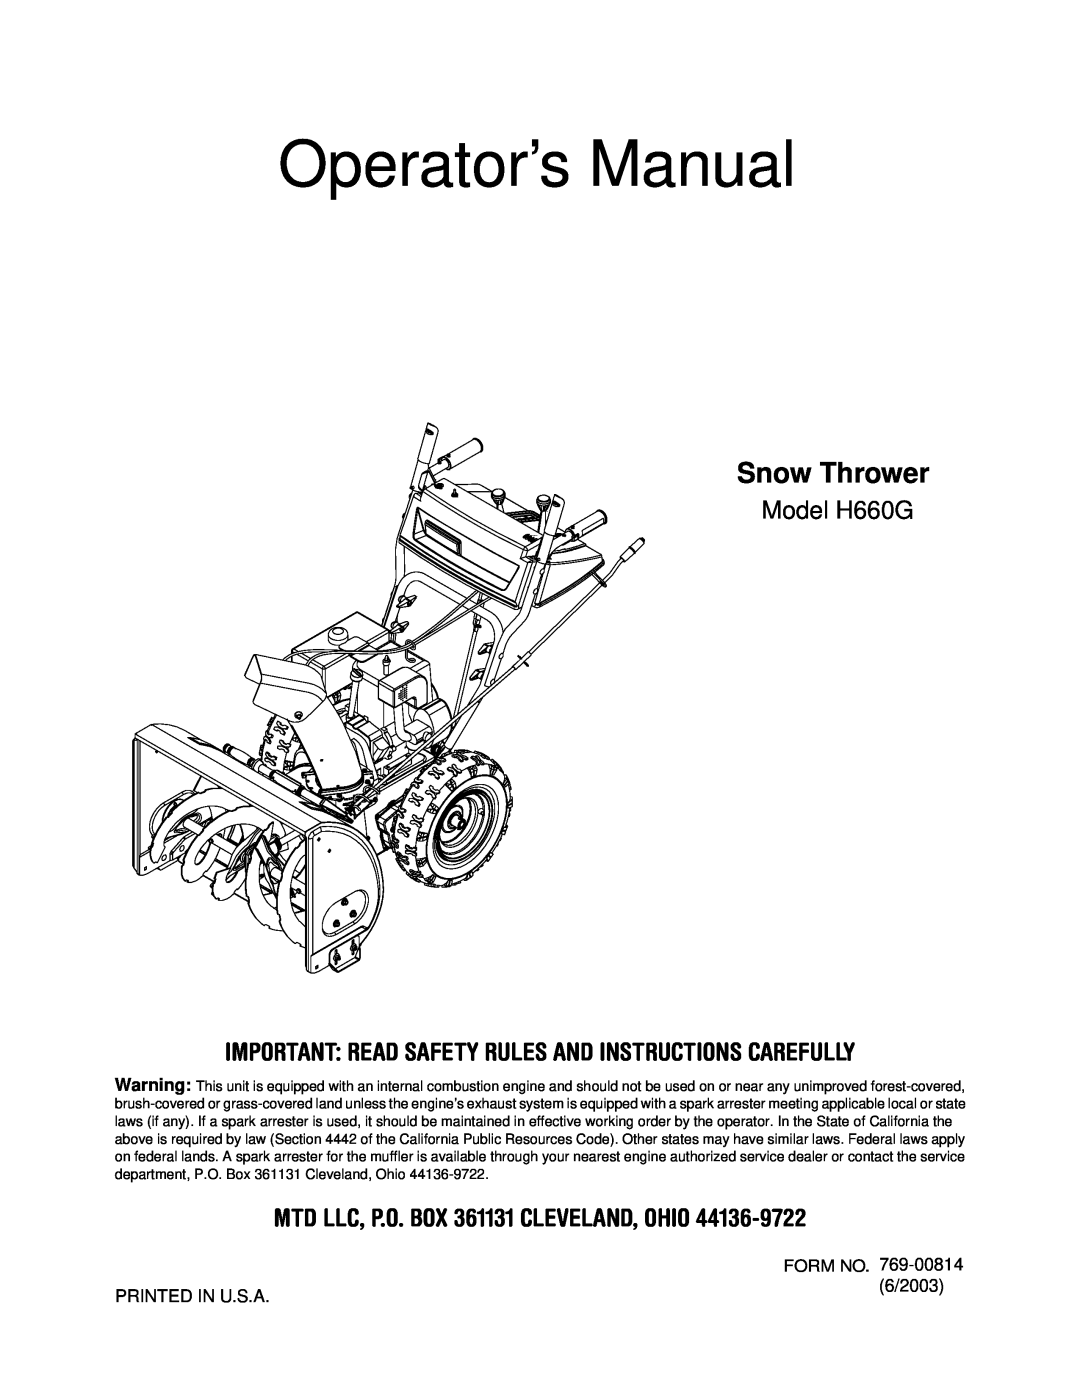 MTD H660G manual Important Read Safety Rules And Instructions Carefully, MTD LLC, P.O. BOX 361131 CLEVELAND, OHIO 